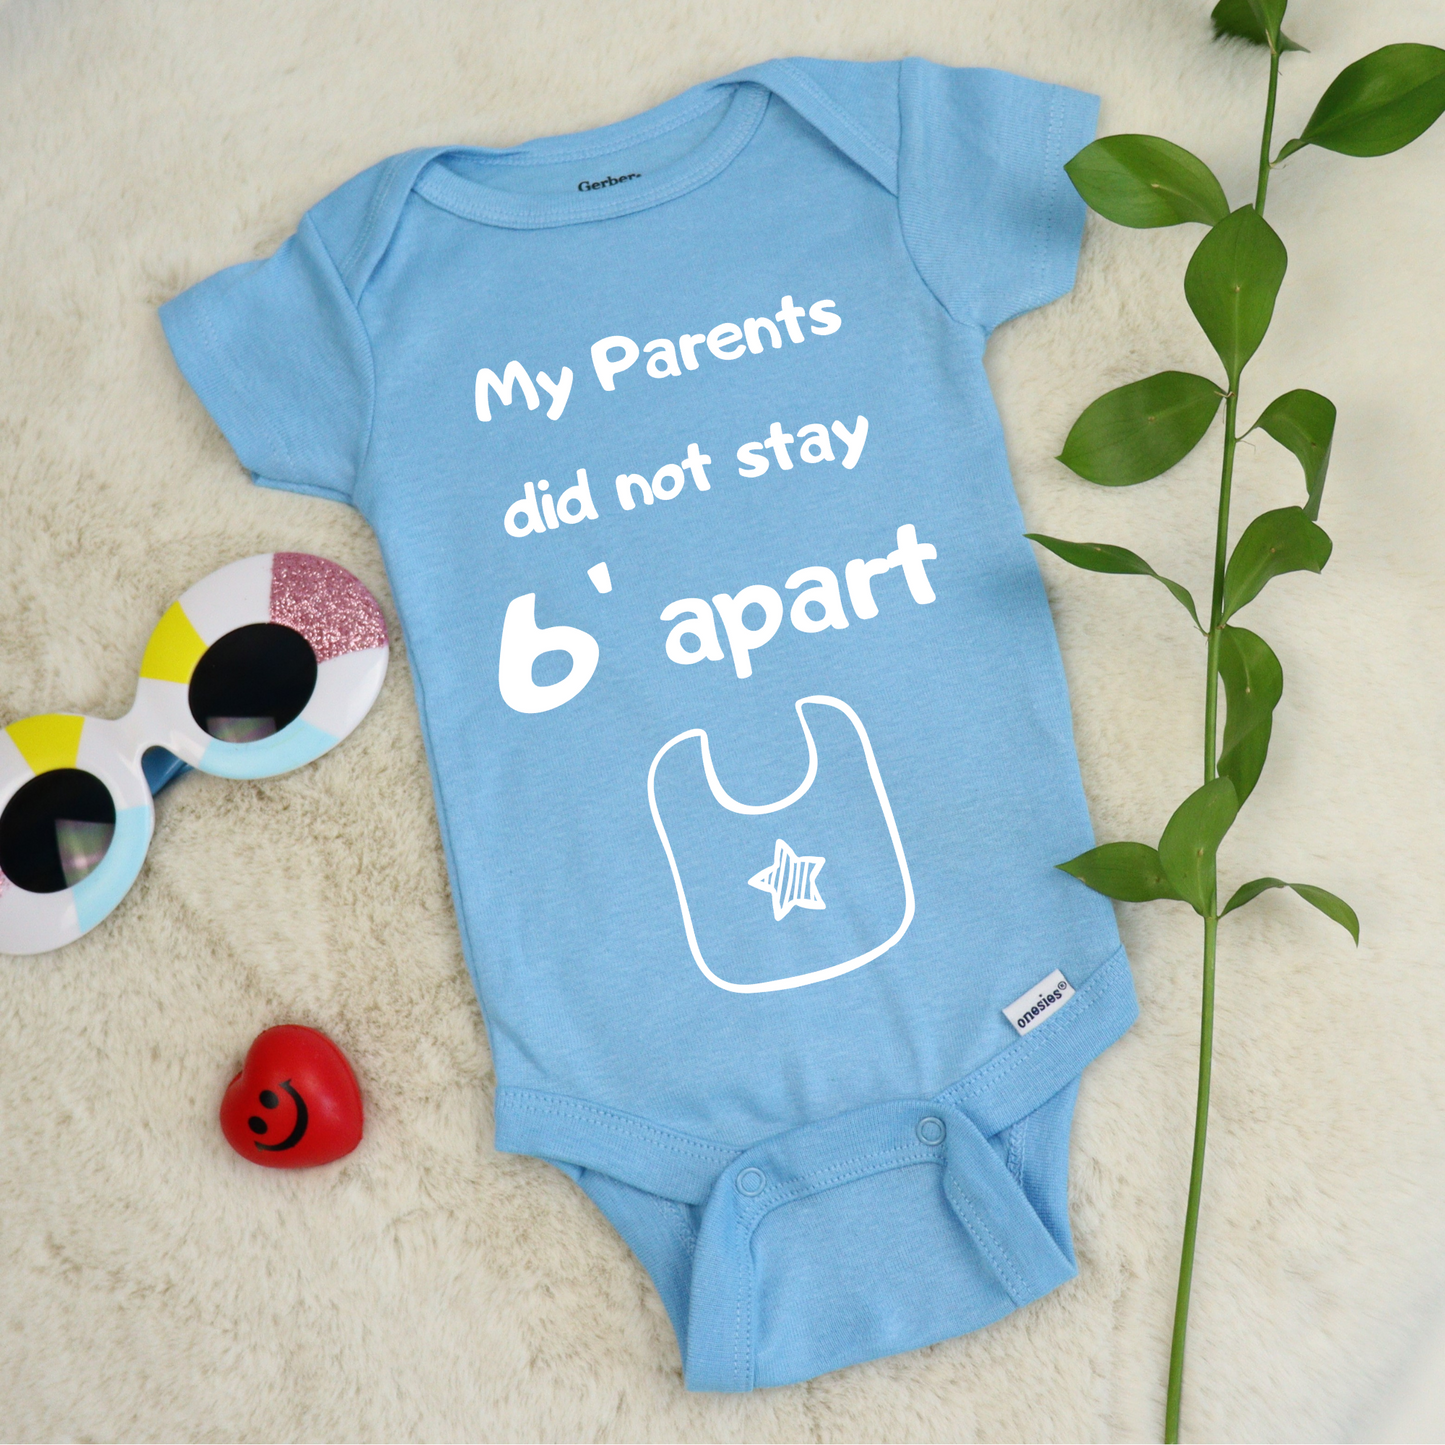 My Parents Did not Stay 6 ft Apart Baby Onesie